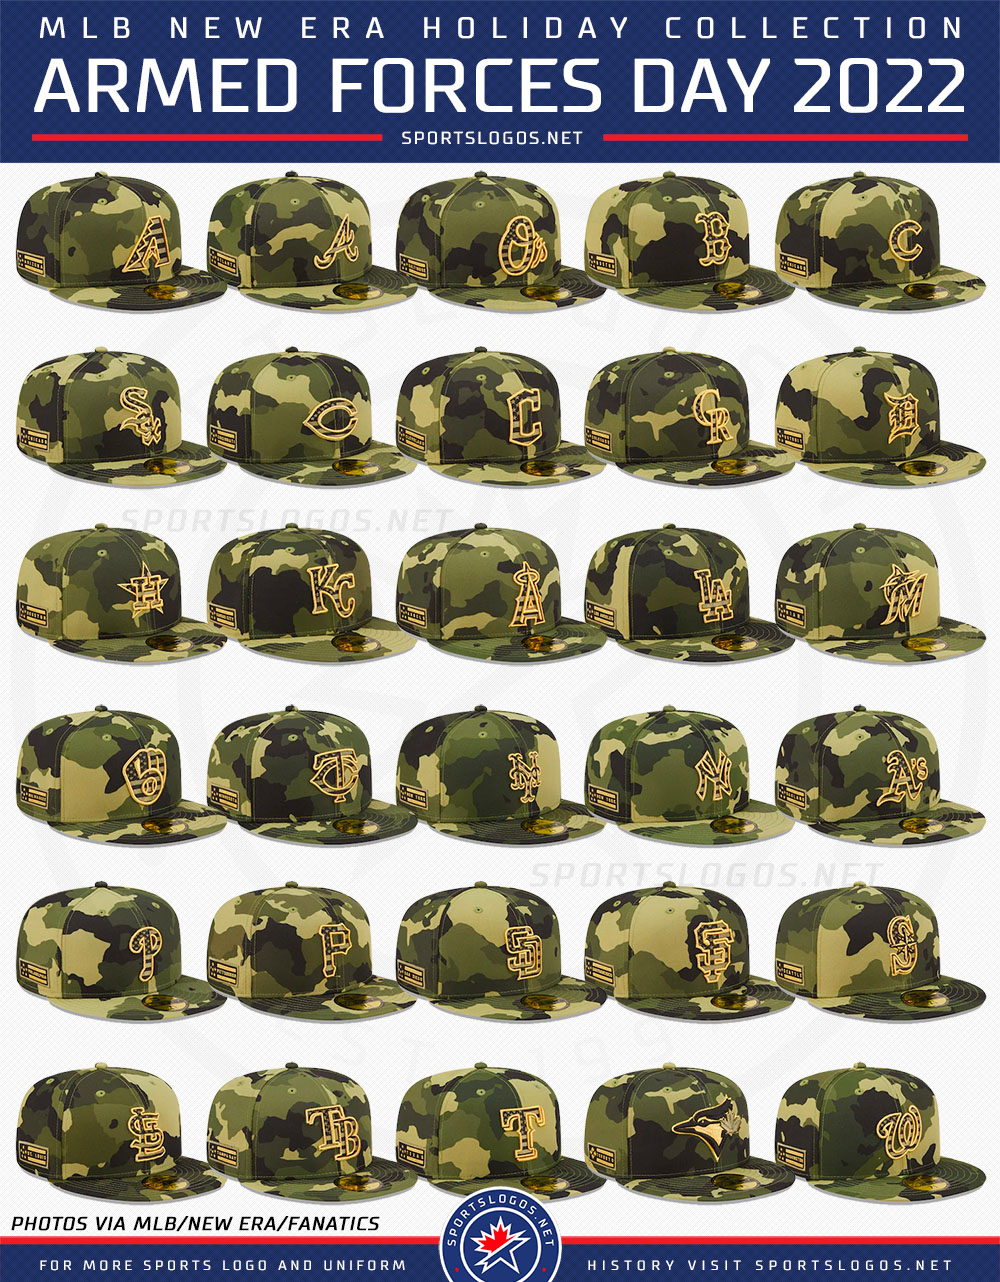 Chris Creamer  SportsLogos.Net on X: Major League Baseball has released  their 2022 Armed Forces Day camouflage cap collection. Each team will wear  their respective camo-themed cap during games played over Armed